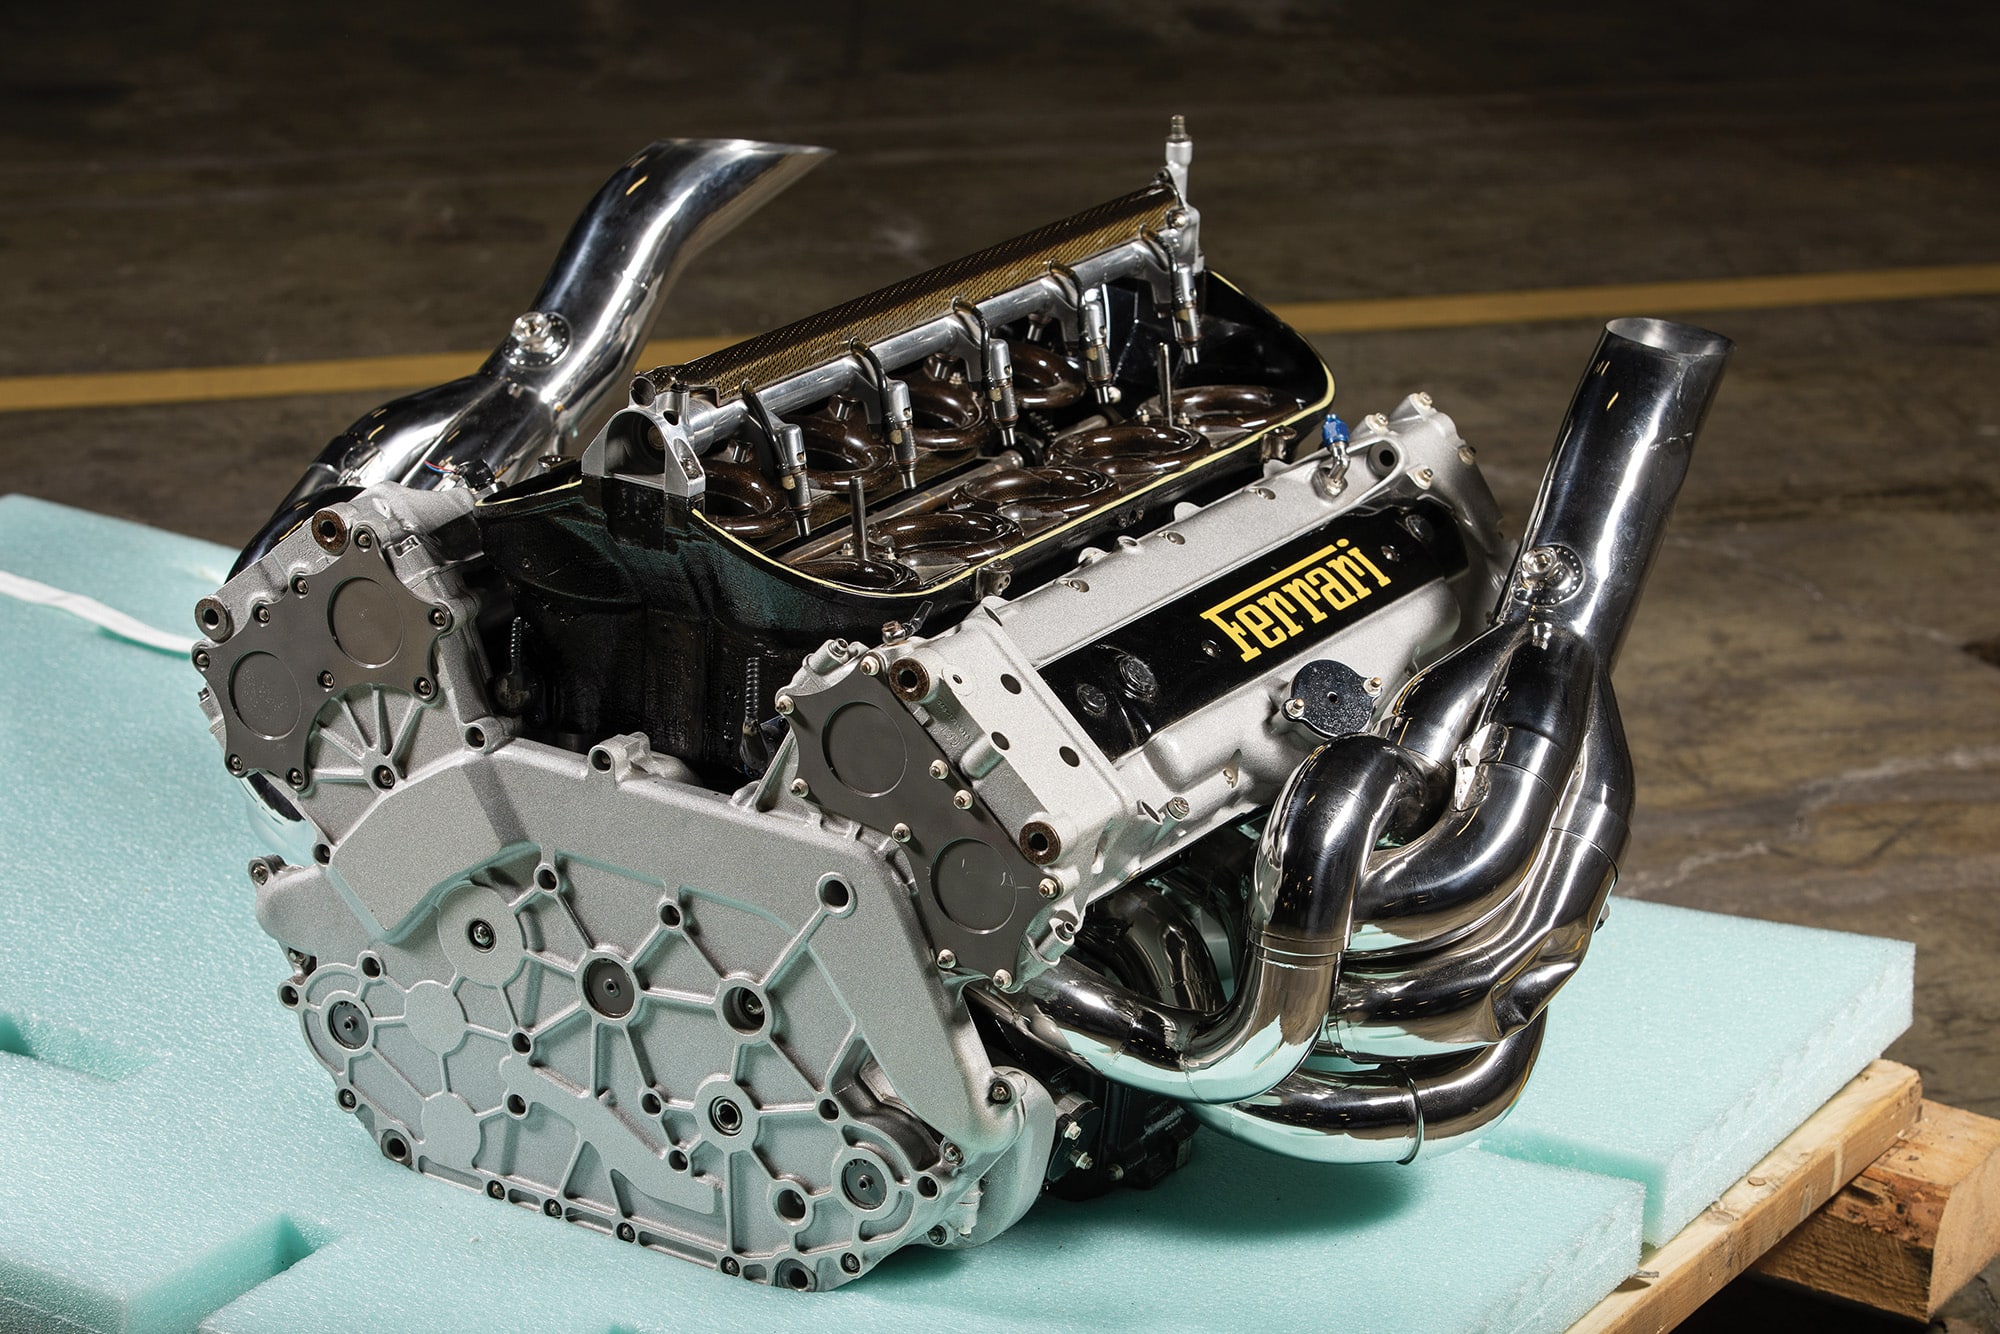 Ferrari F2002 engine sold for $93,600 in a December 2019 auction